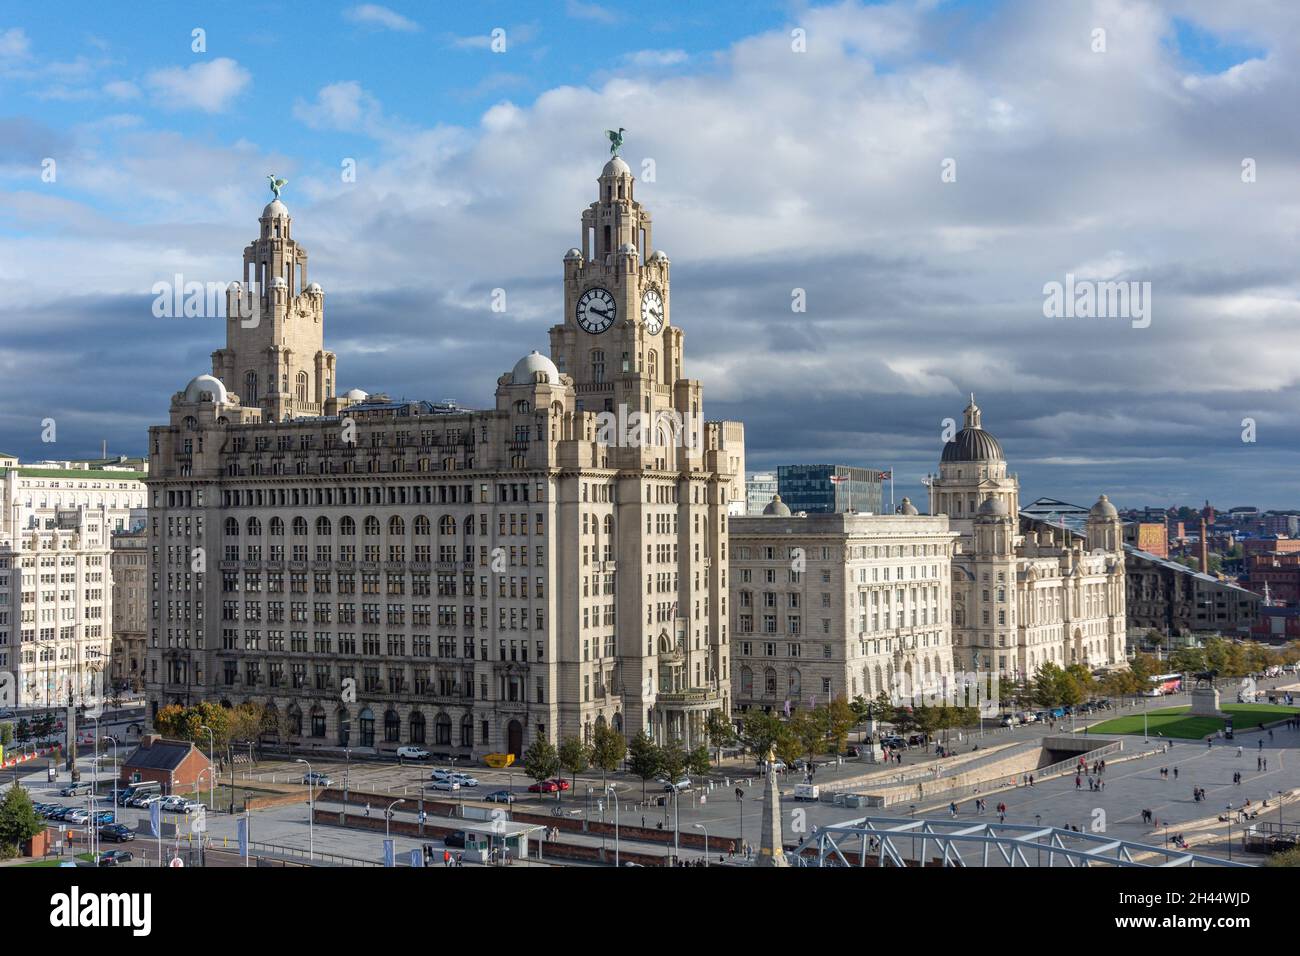 The Three Graces (Royal Liver Building, Cunard Building and Port of Liverpool Building), Pier Head, Liverpool, Merseyside, England, United Kingdom Stock Photo